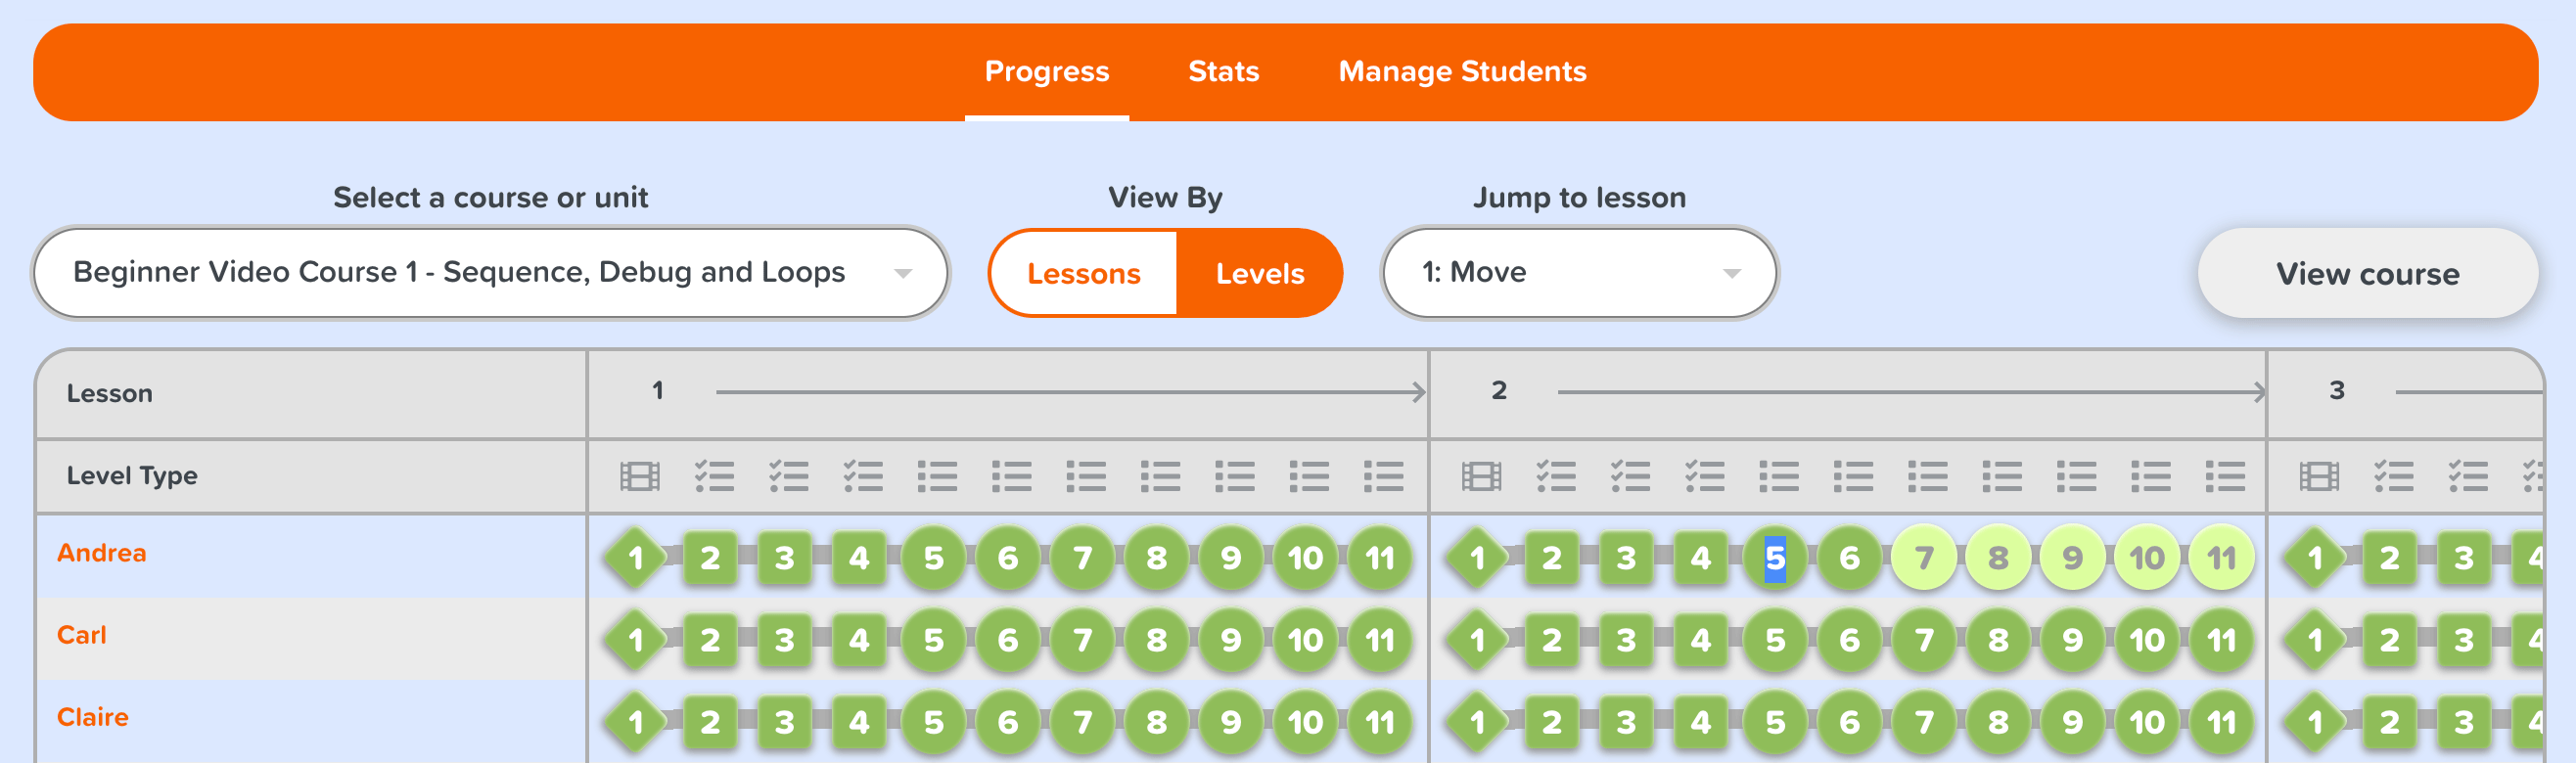 Student progress view by levels